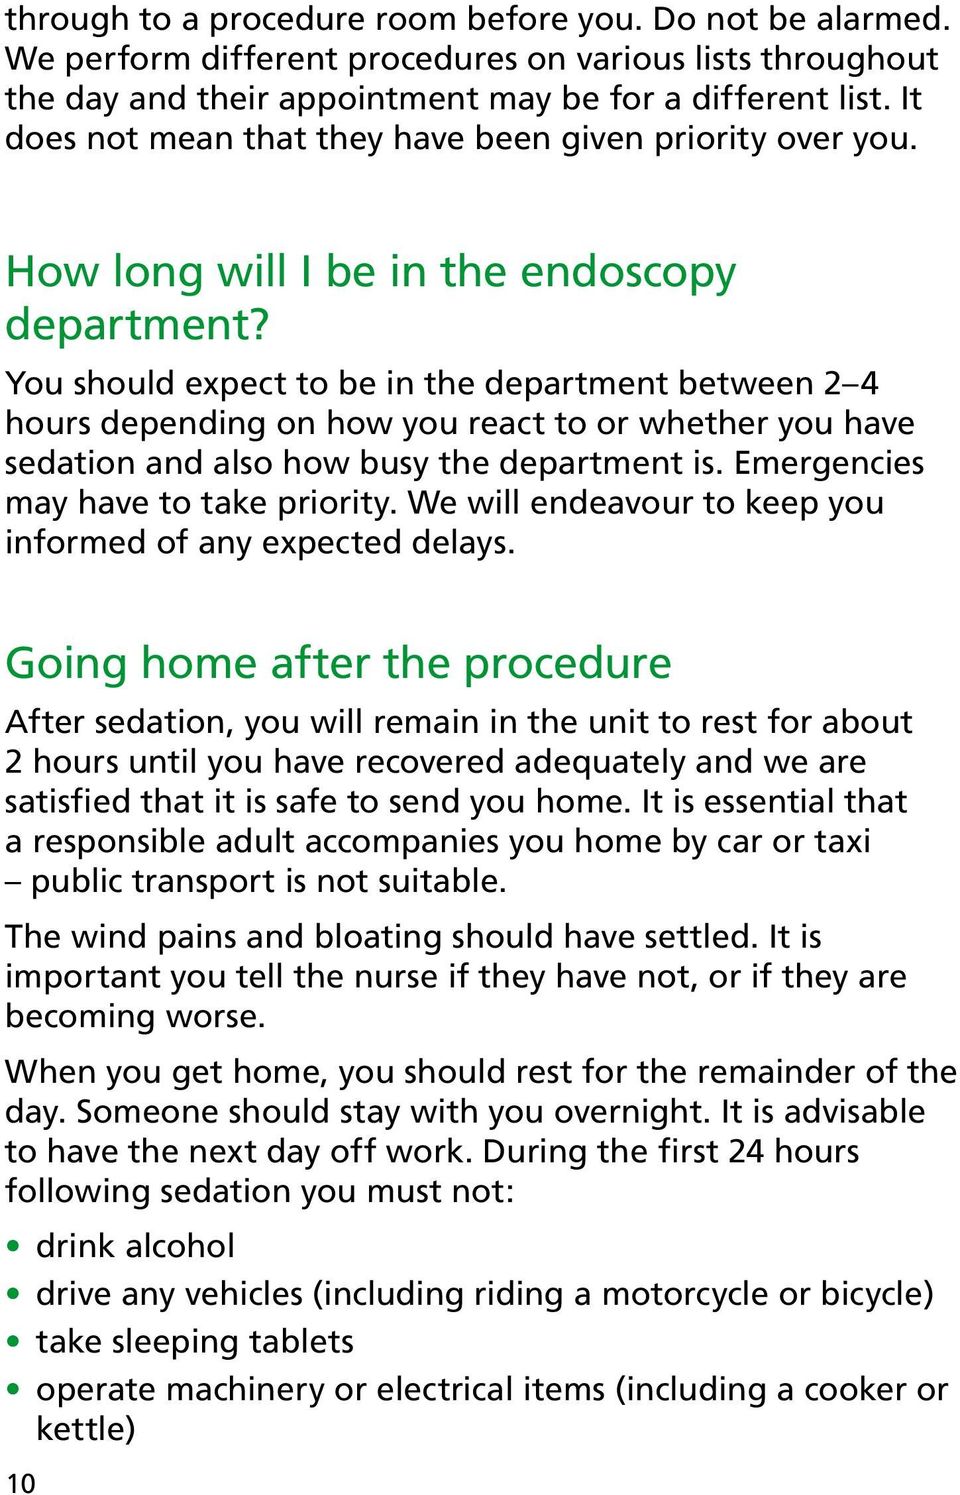 You should expect to be in the department between 2 4 hours depending on how you react to or whether you have sedation and also how busy the department is. Emergencies may have to take priority.